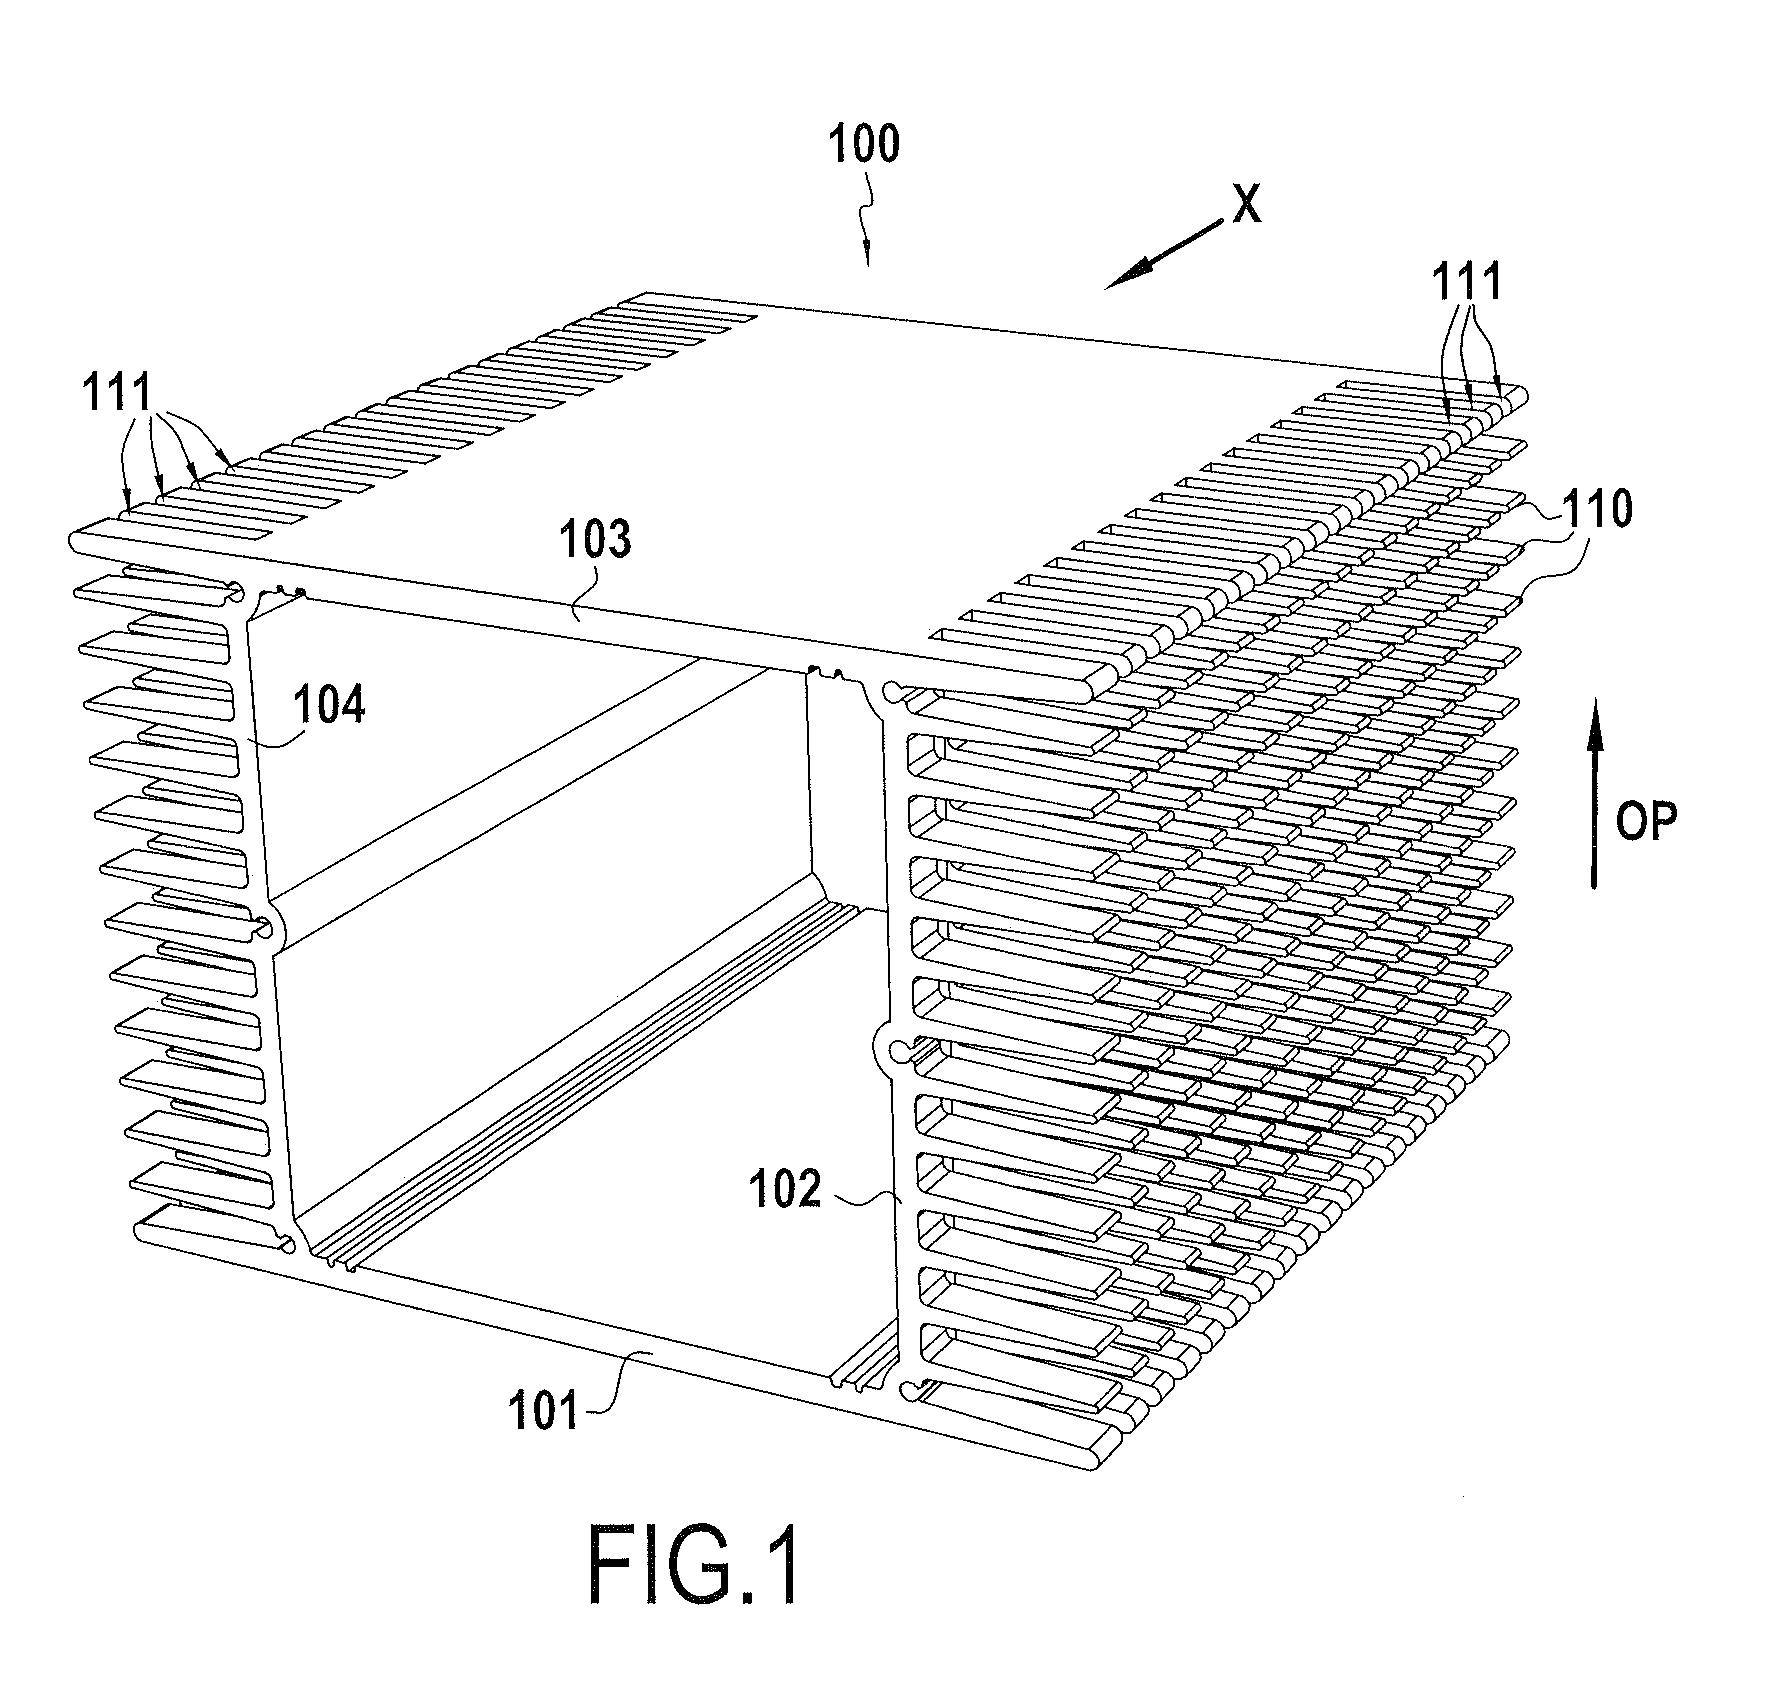 Multi-position housing made of metal extruded section member for manufacturing a waterproof power electronic device